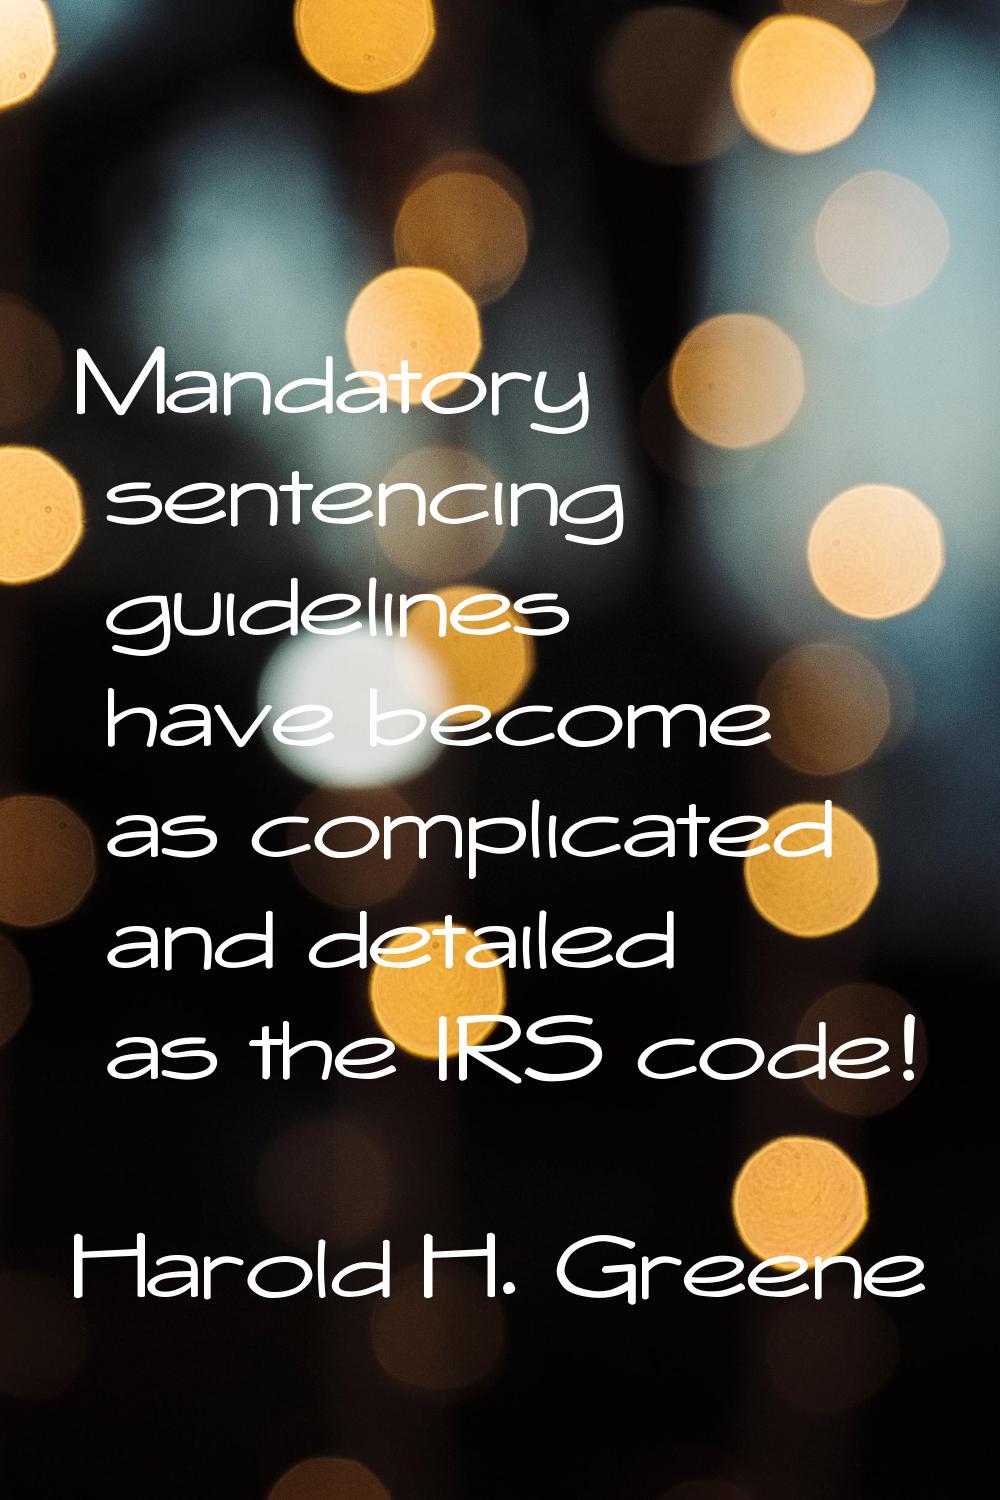 Mandatory sentencing guidelines have become as complicated and detailed as the IRS code!